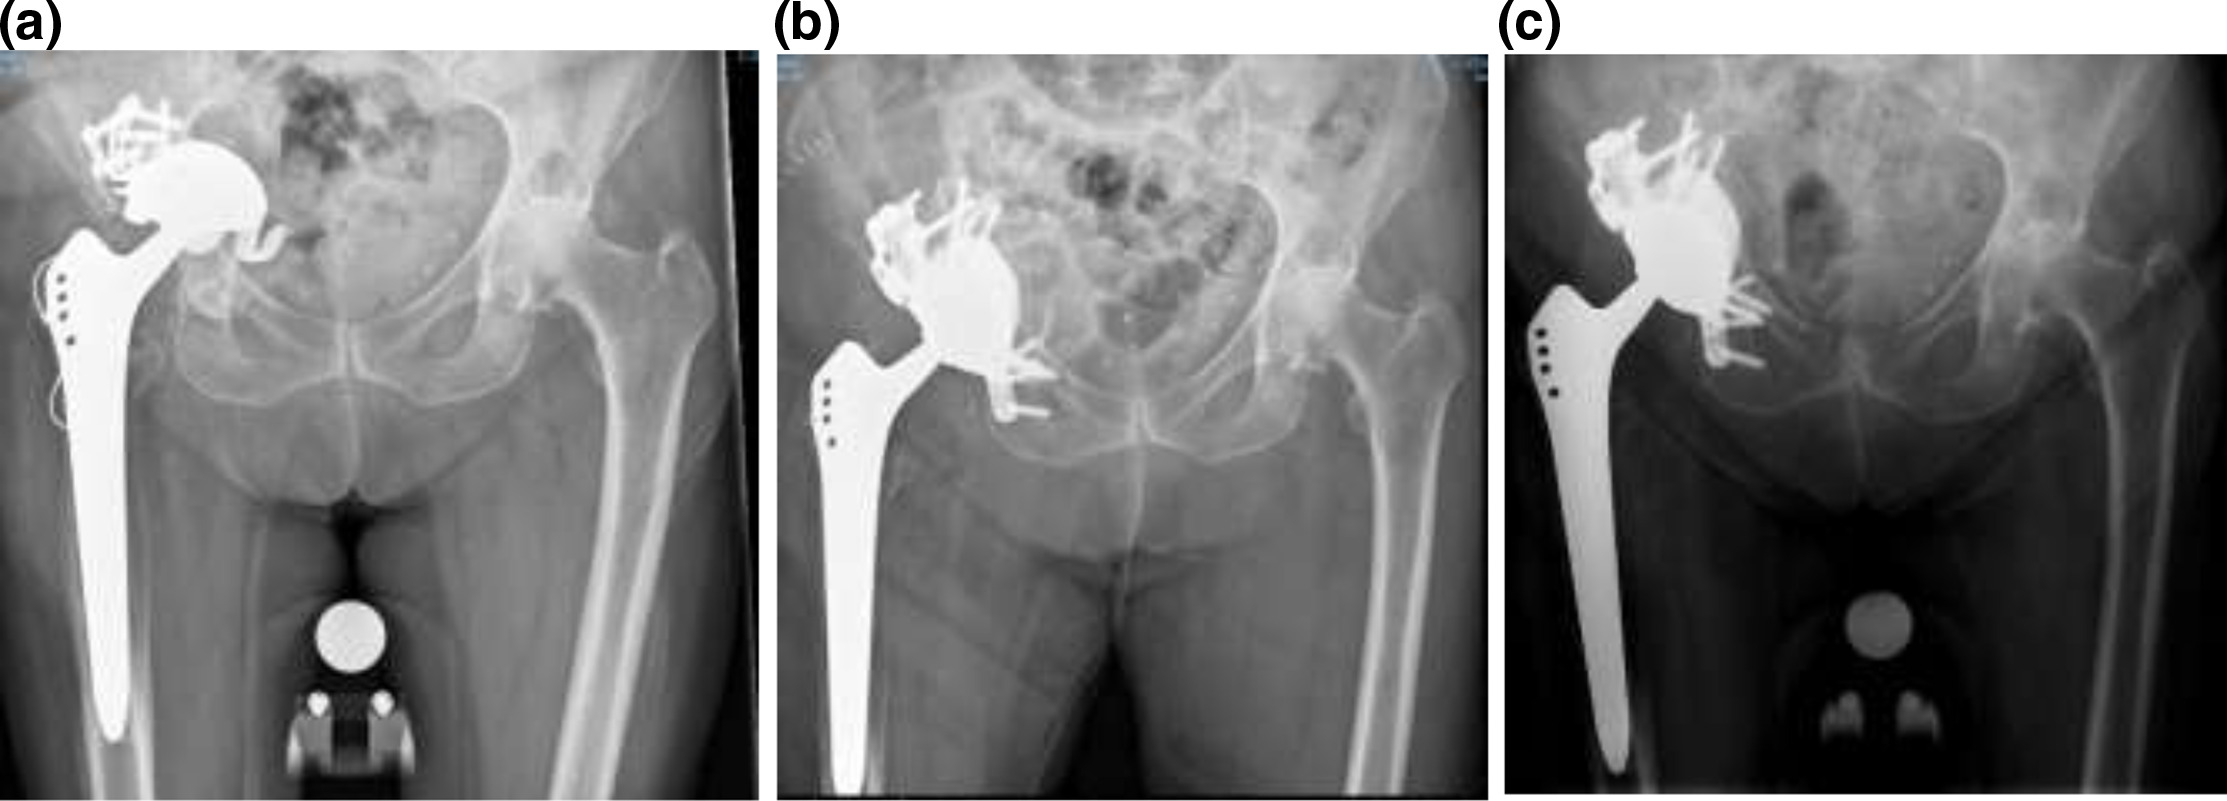 Fig. 2 
            a) Preoperative anteroposterior pelvic radiograph: failed acetabular component with protrusion and pelvic discontinuity. b) An immediate postoperative radiograph demonstrating a fixed custom-made triflange component. c) A two-year postoperative radiograph demonstrating fixation and healed discontinuity.
          